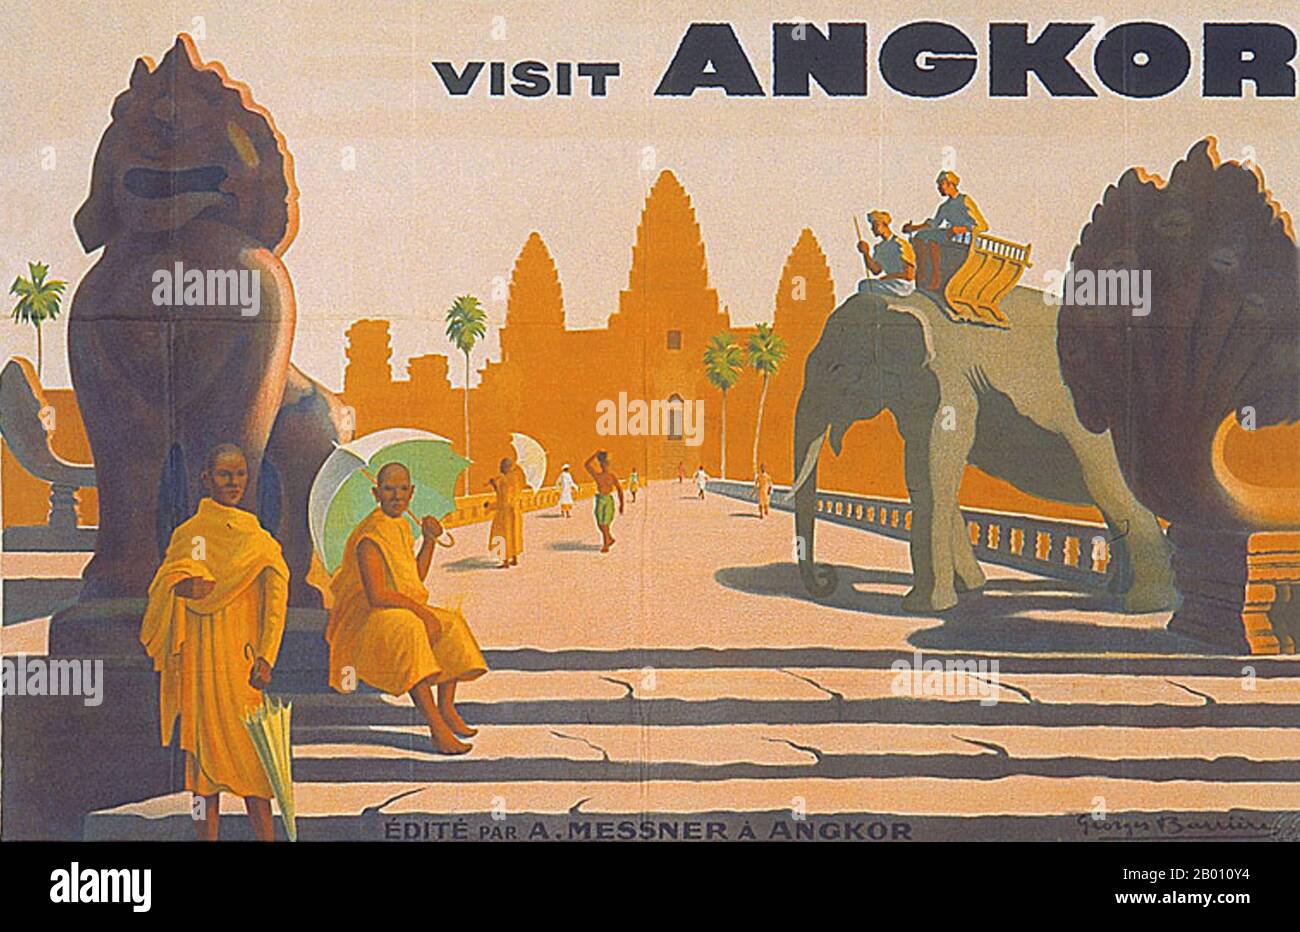 Cambodia: 'Visit Angkor', a 1930s tourism poster by Georges Barriere (1881-1944).  Georges Barrière (28 March 1881 in Chablis, France – 1944 in Đồ Sơn, Vietnam) was a French painter. He went to Paris at the age of 19 to follow the courses of Léon Bonnat and Jules Adler at the Beaux-Arts in Paris. His paintings were shown at the Salon d'Automne in 1903, at the Société des Artistes Indépendants in 1906, and the Salon des Artistes Français in 1909. Stock Photo